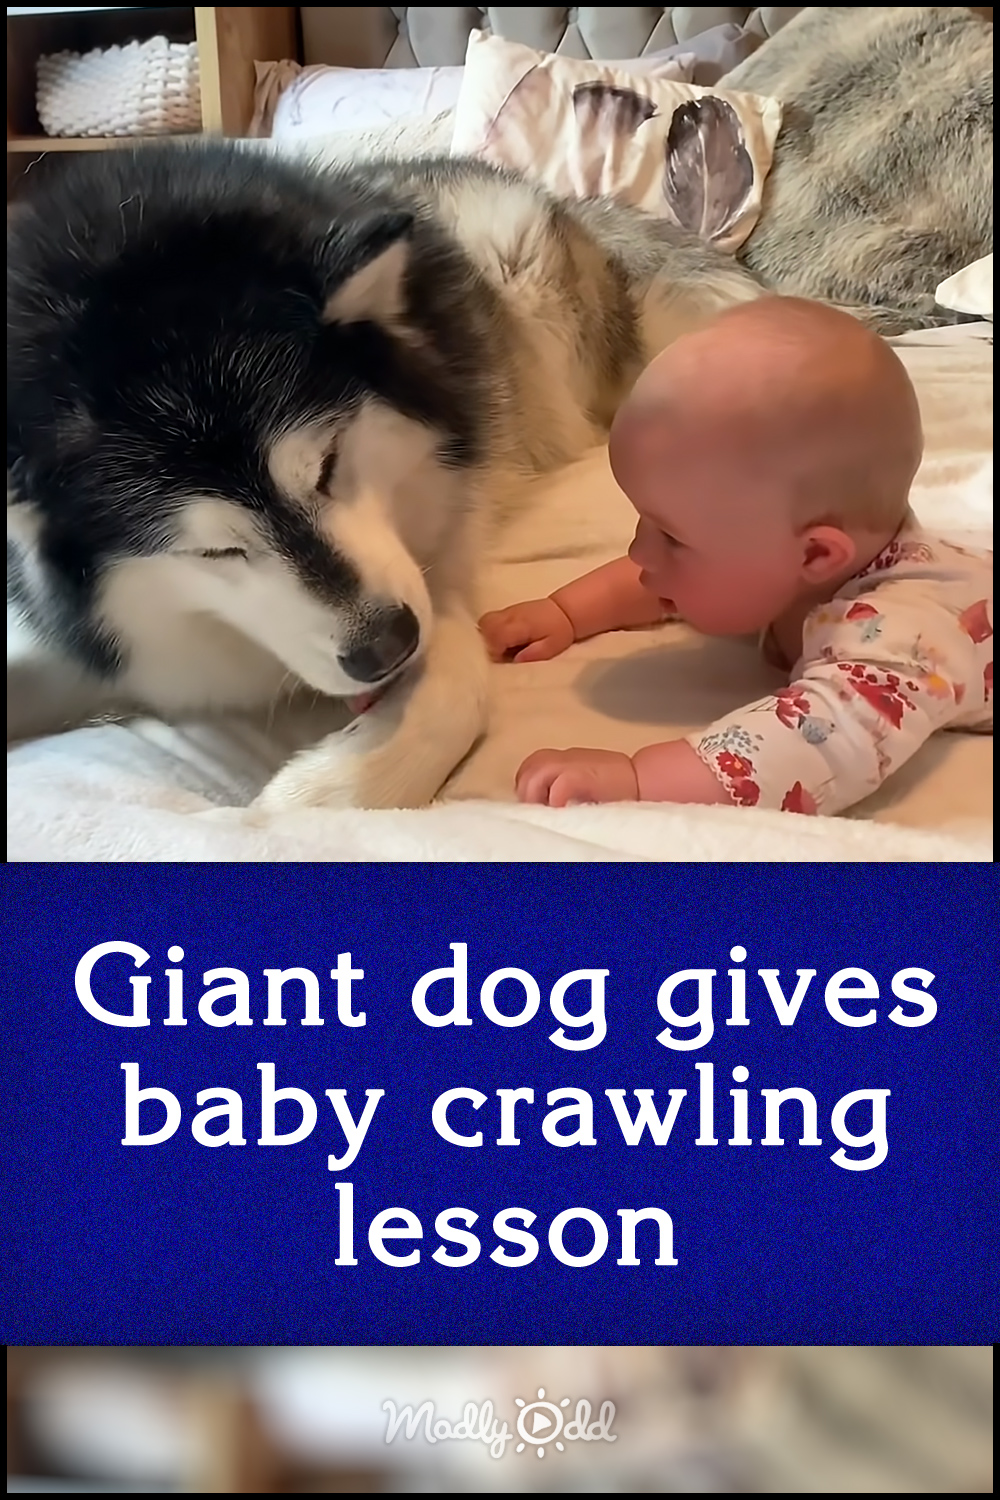 Giant dog gives baby crawling lesson